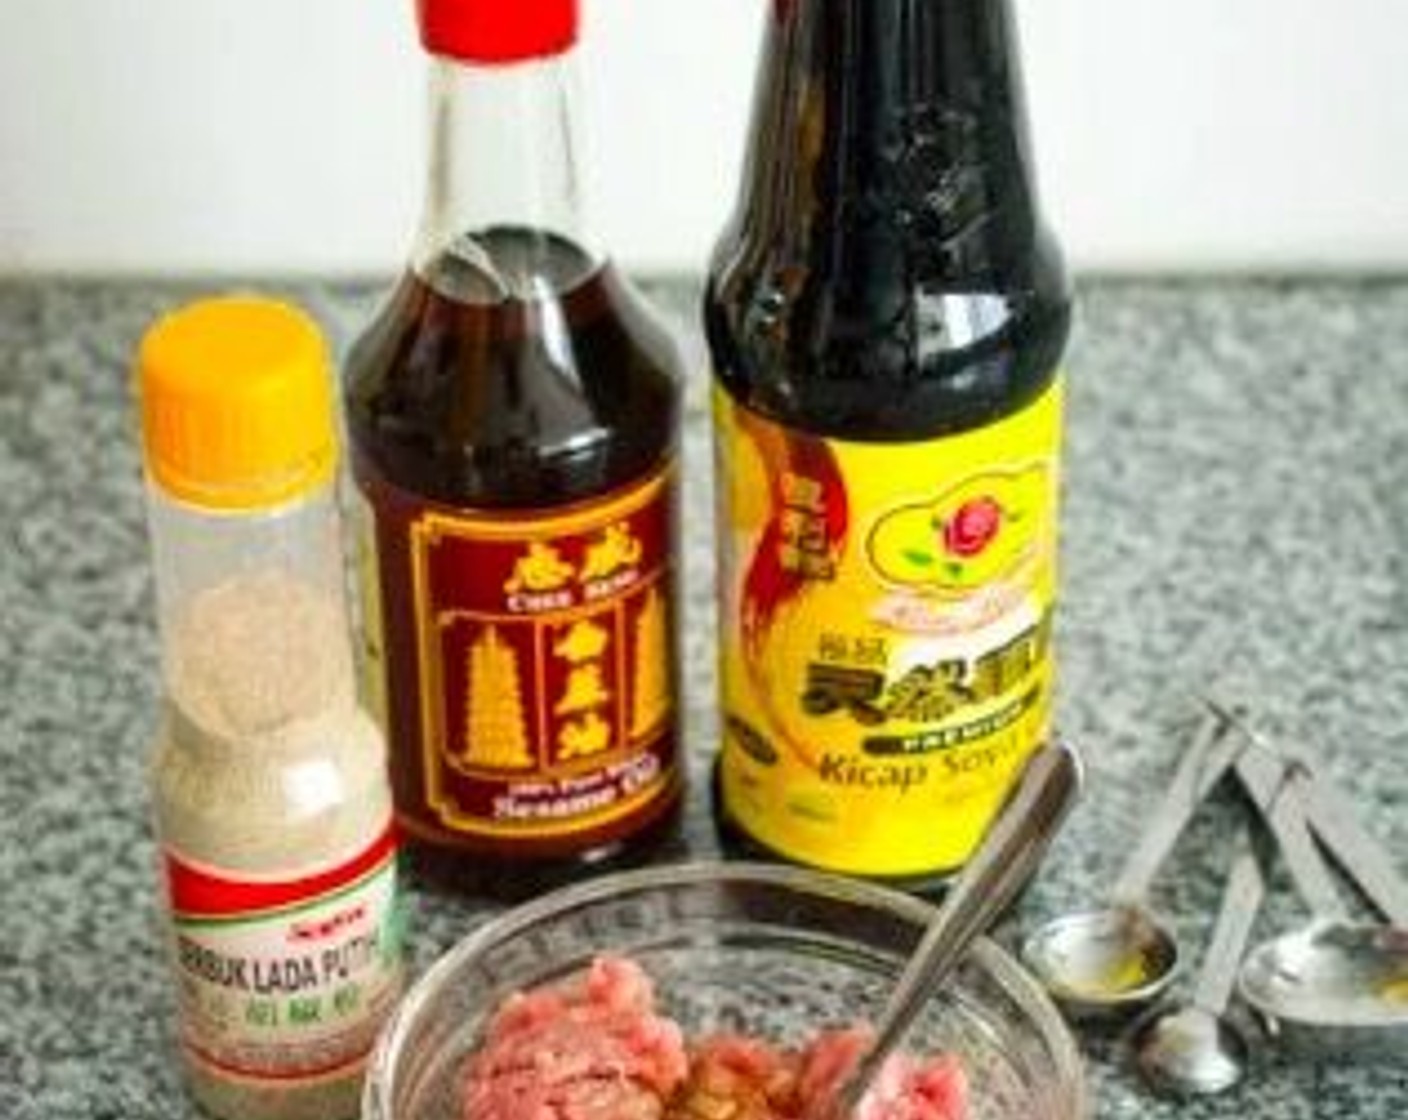 step 1 Marinate Ground Pork (8 oz) with Sesame Oil (1 tsp), Soy Sauce (1 tsp), and Ground White Pepper (2 dashes). Let it sit at room temperature for just a few minutes as you prepare the rest of the ingredients.